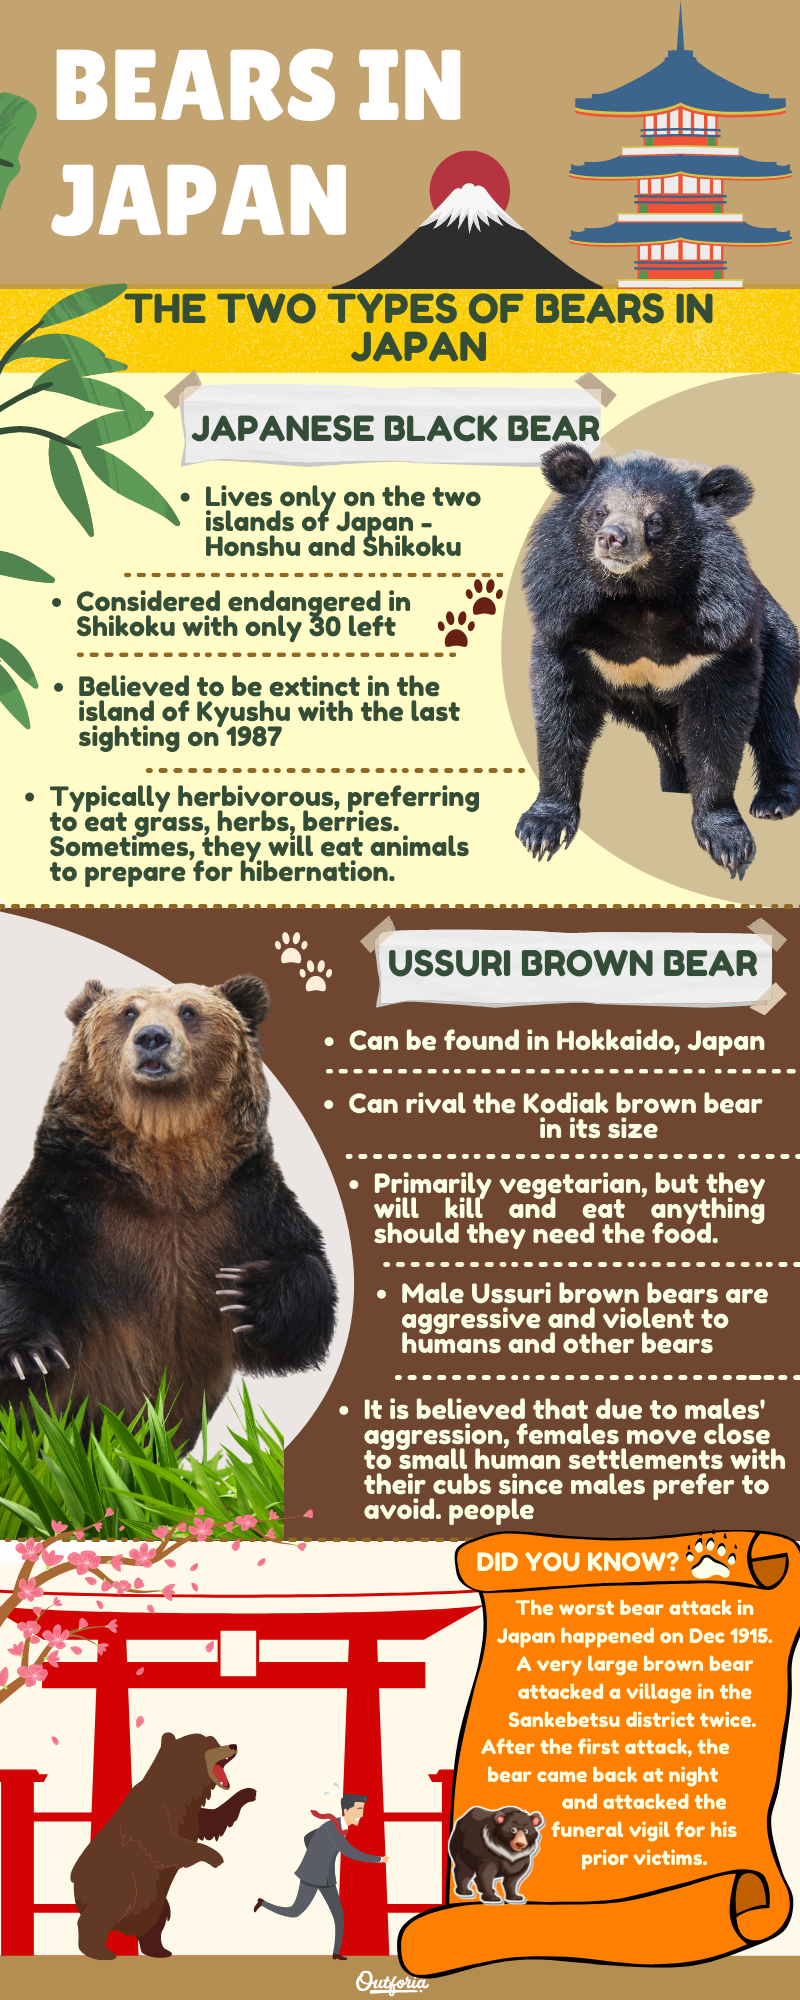 bears in Japan infographic and facts about about Japanese black bear and ussuri brown bear